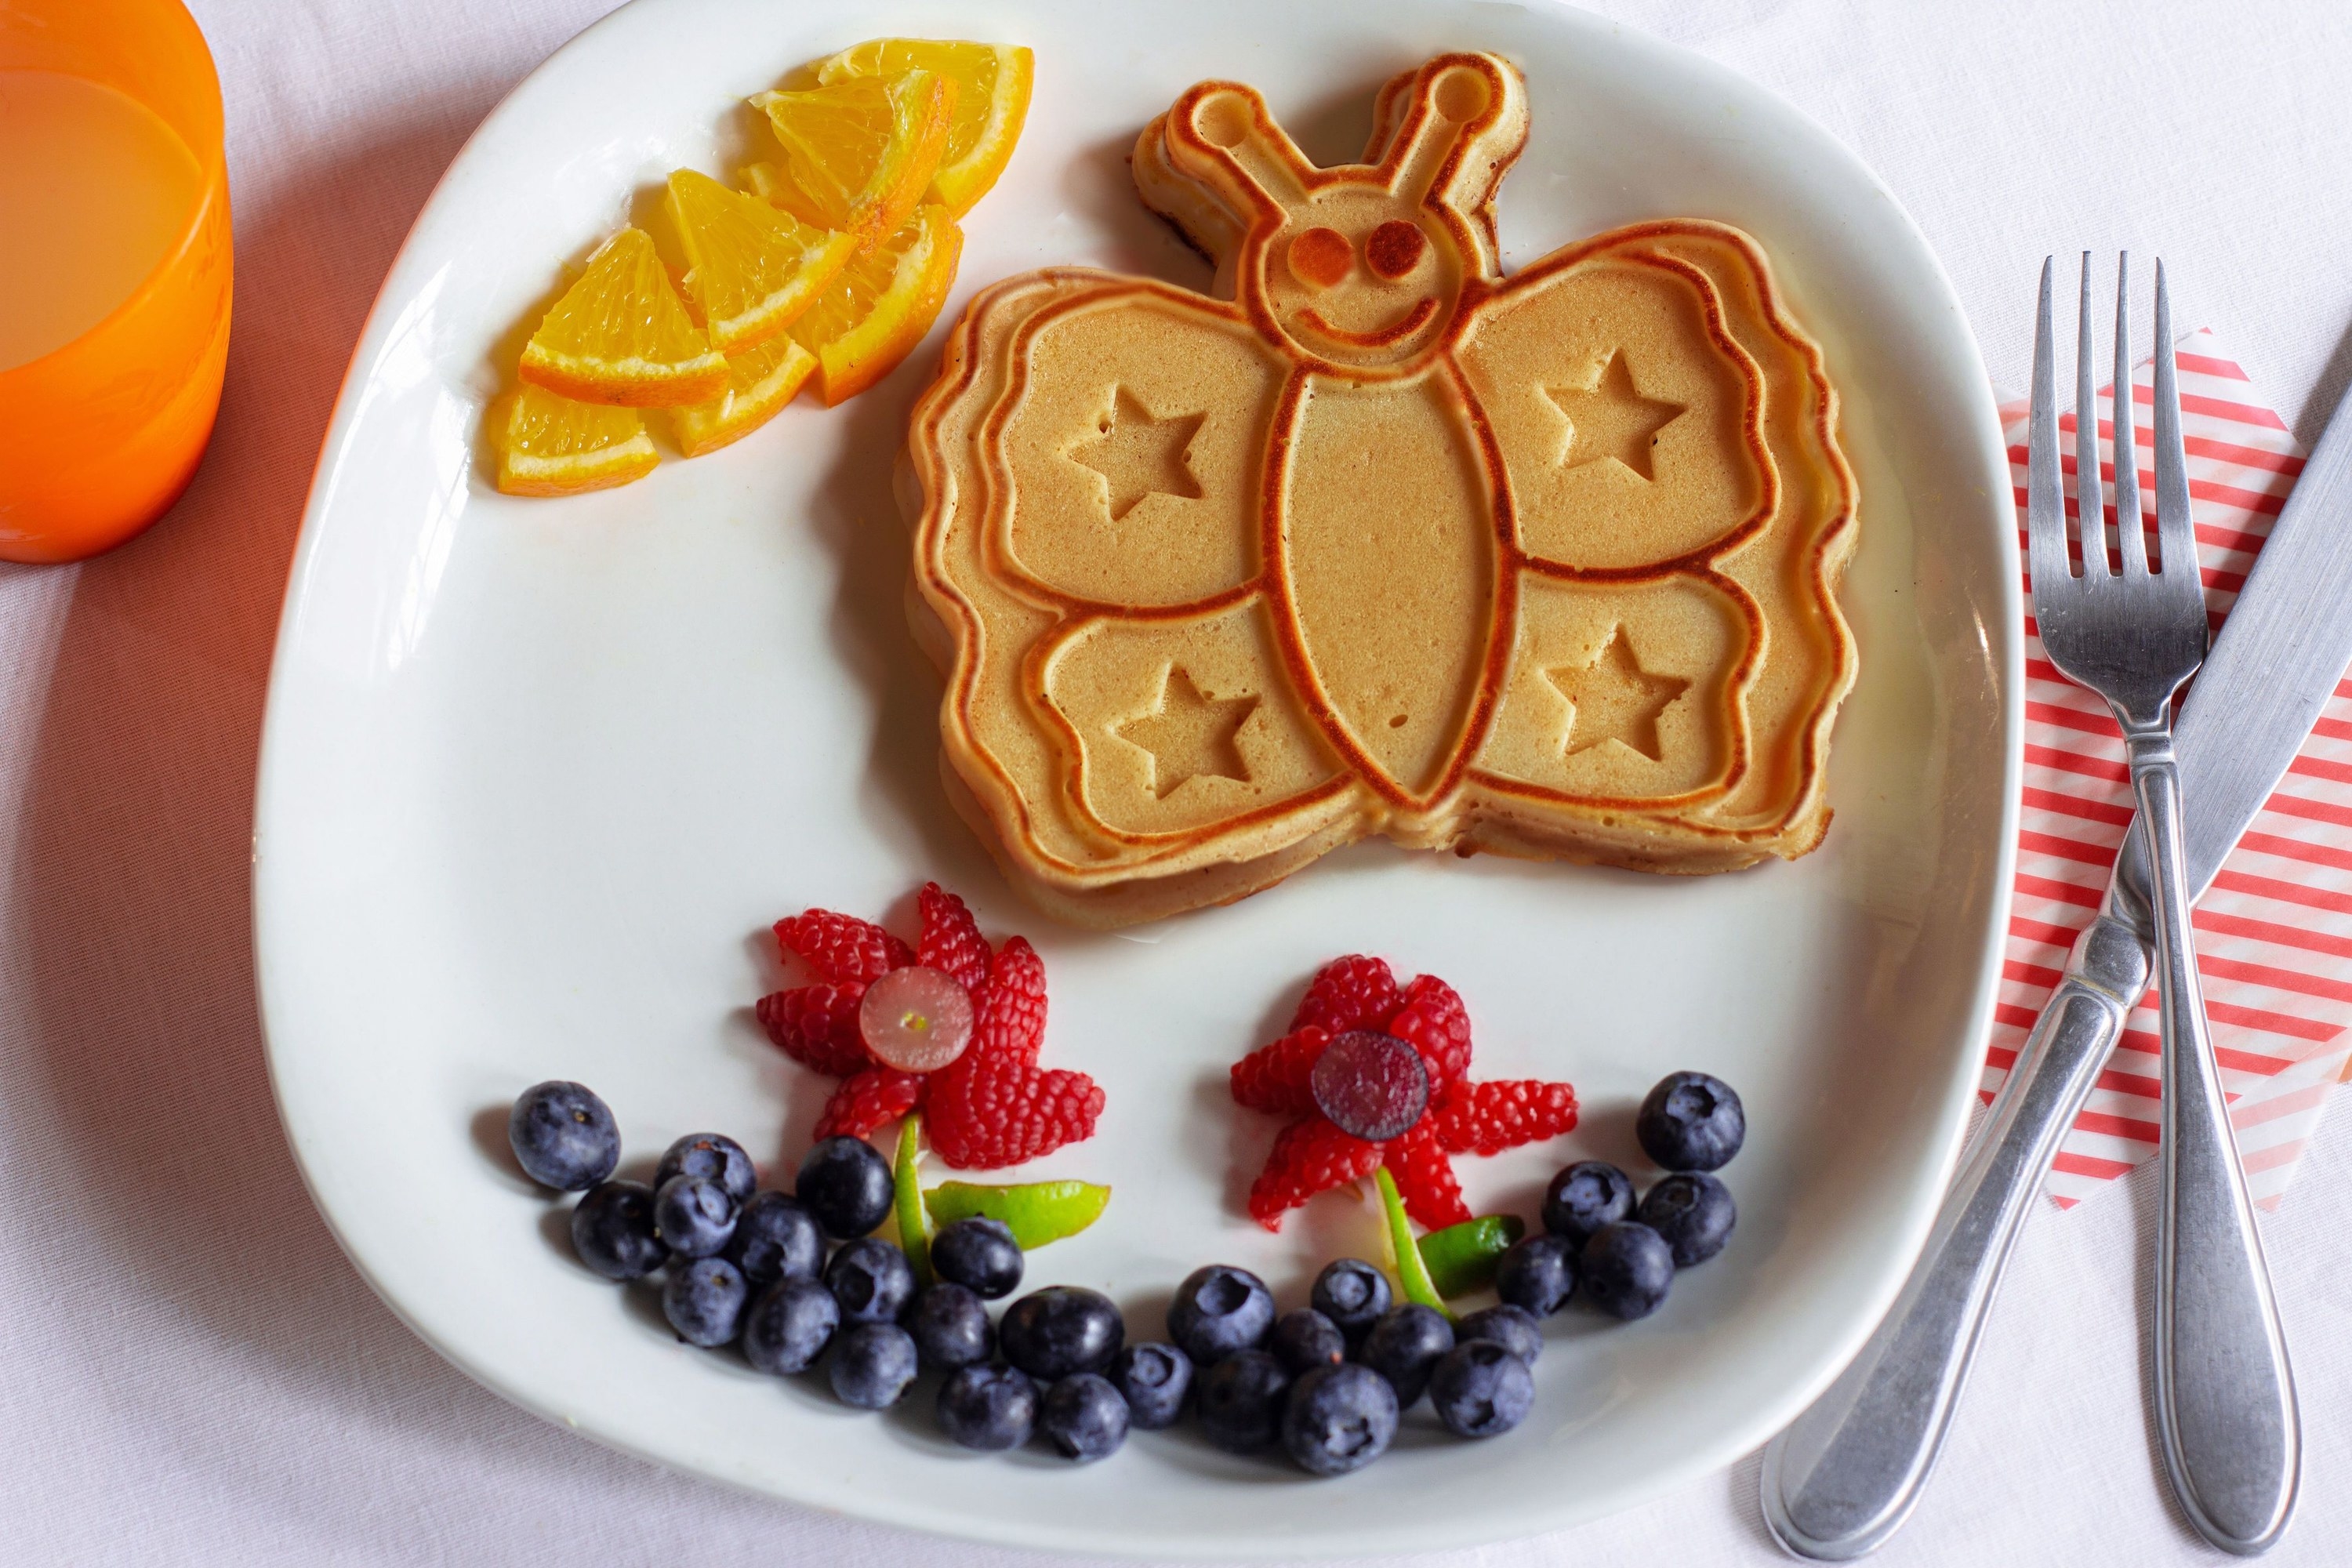 A butterfly-shaped pancake on a plate with fresh fruit